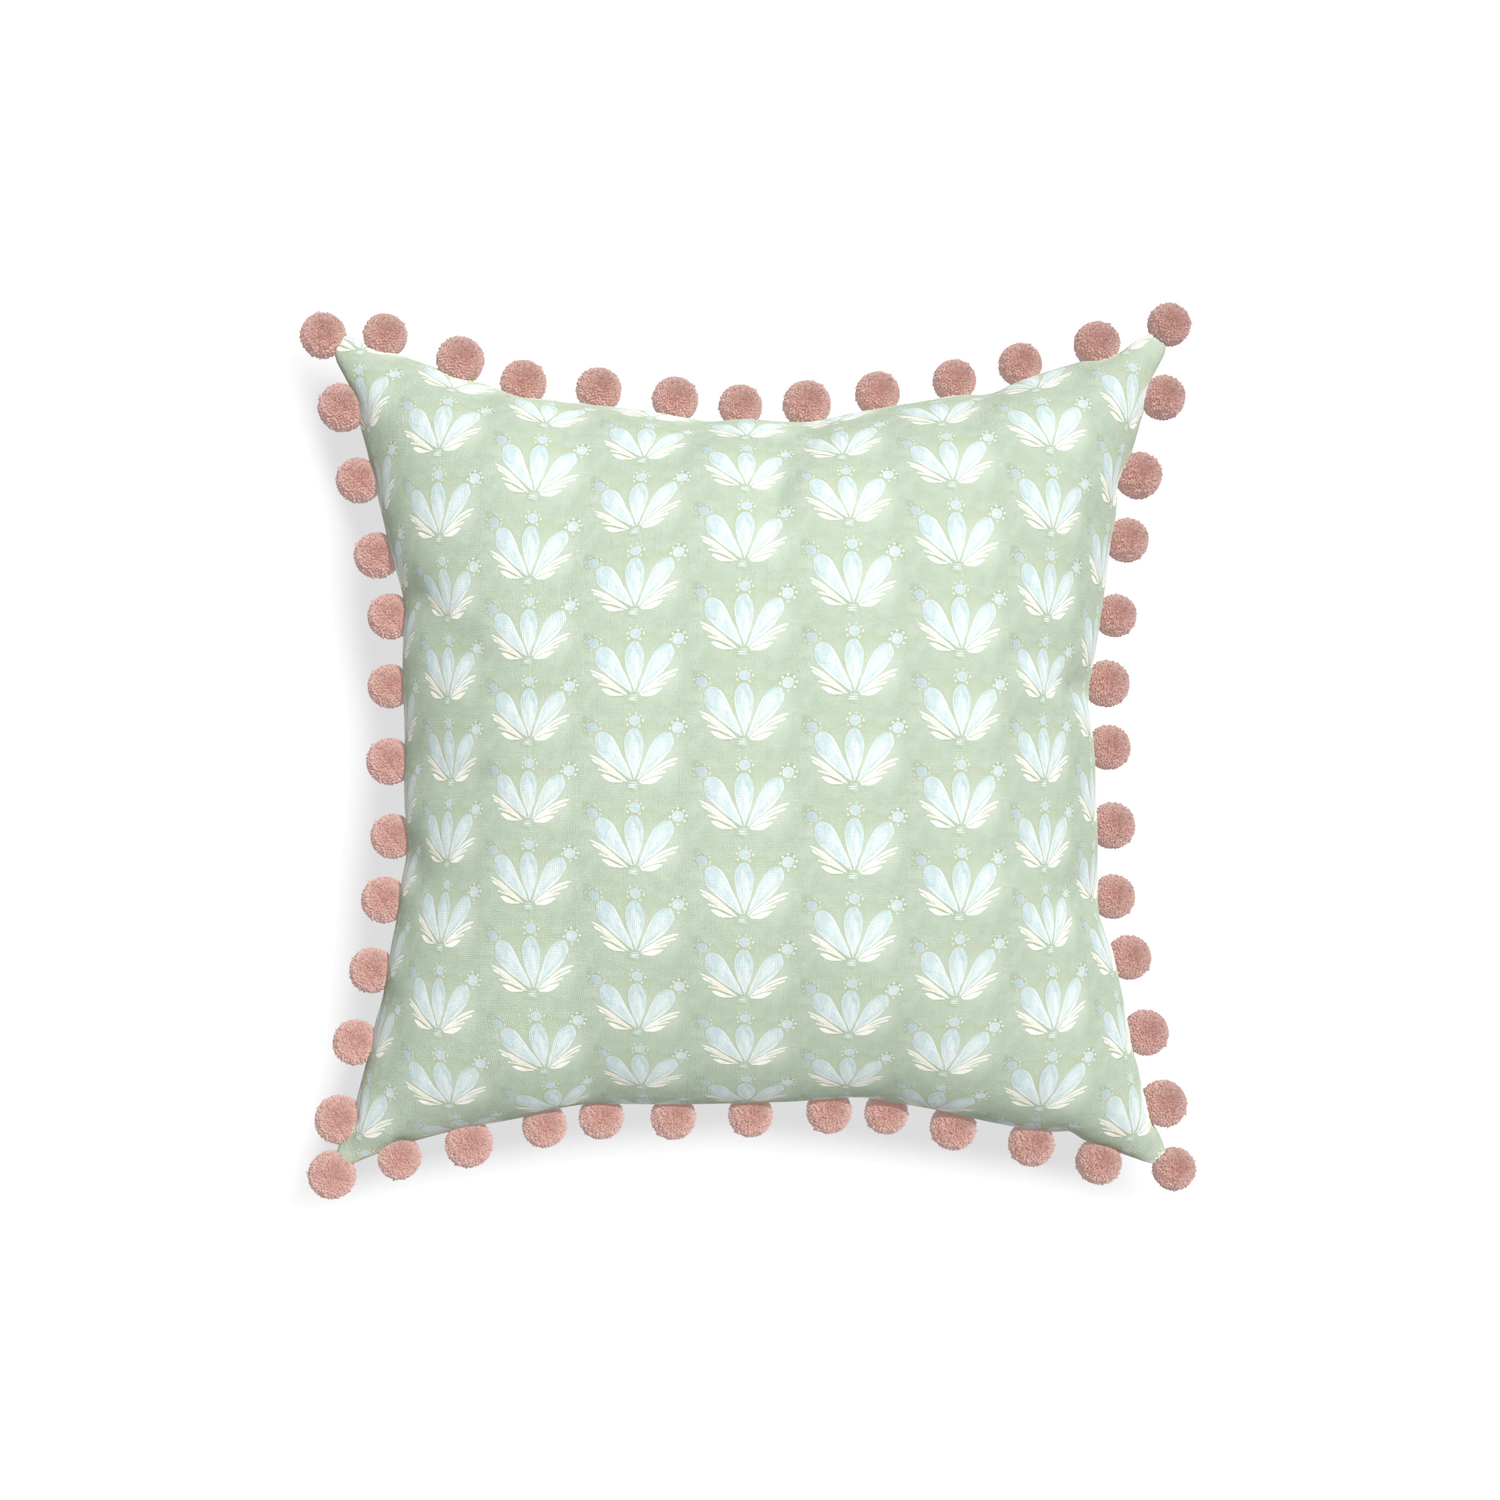 18-square serena sea salt custom blue & green floral drop repeatpillow with rose pom pom on white background